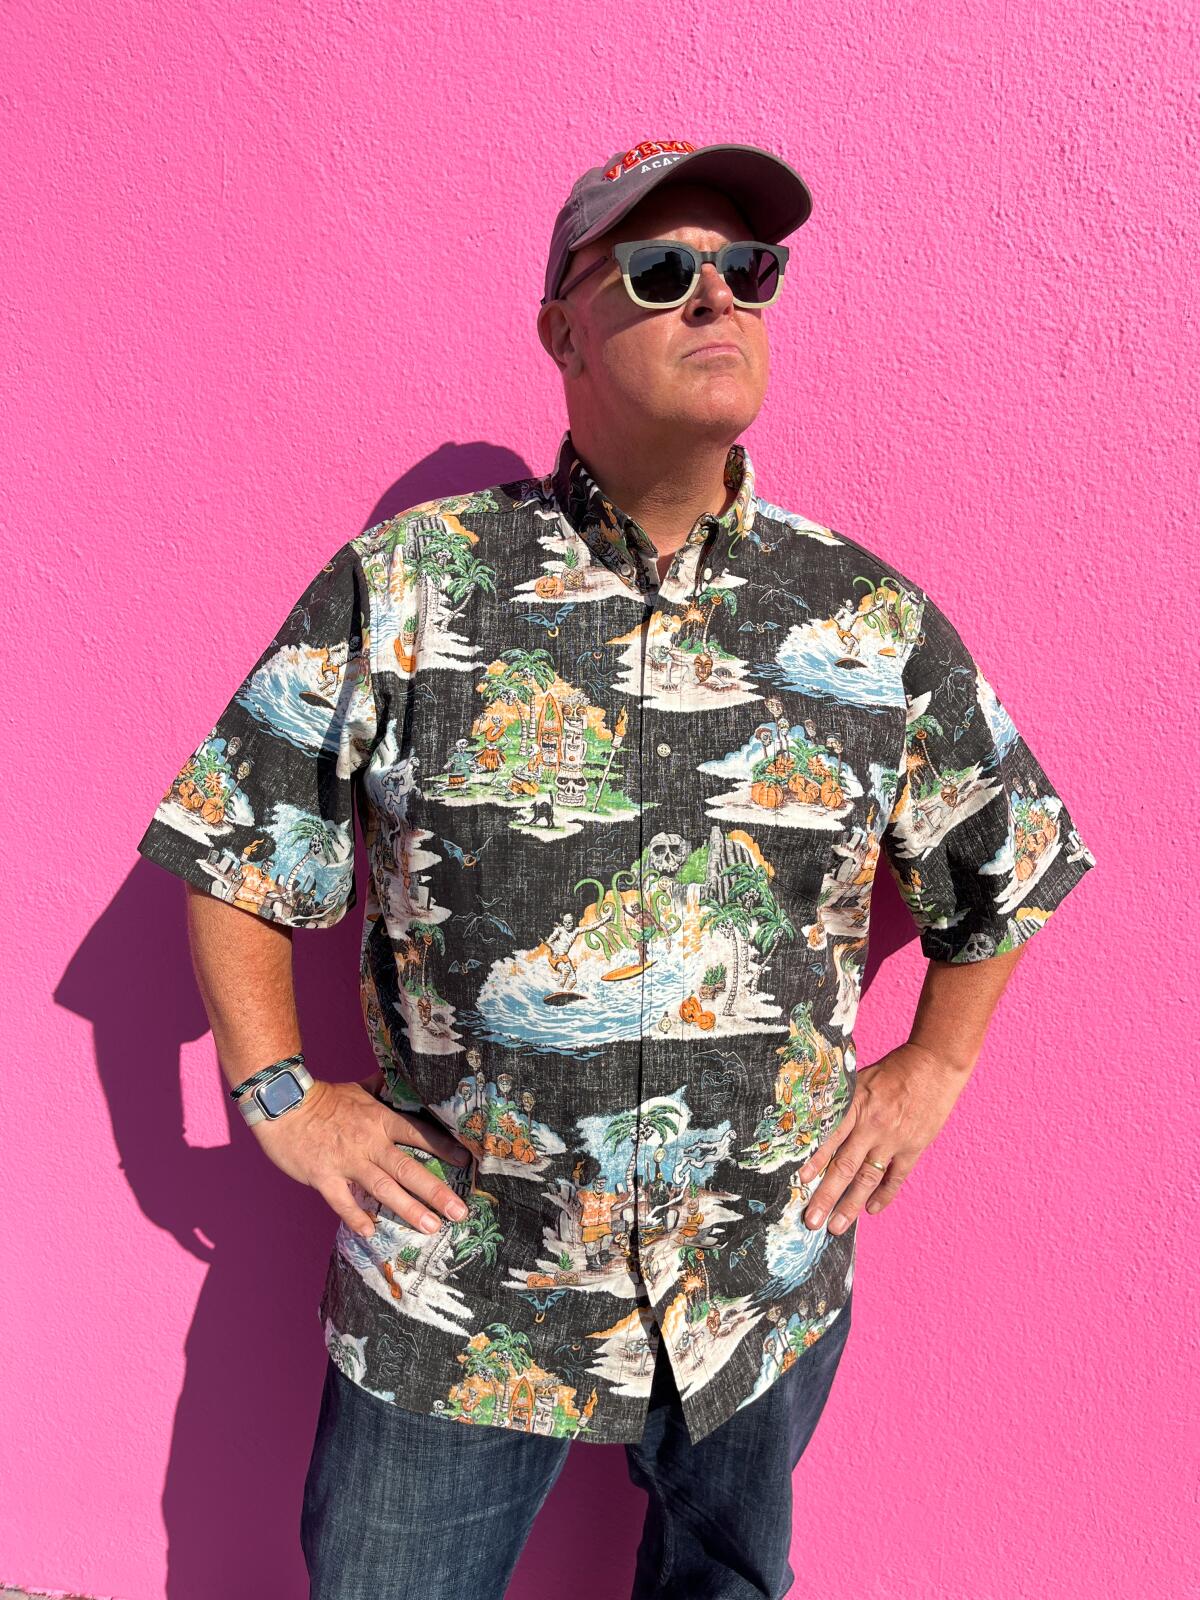 A man stands with his hands on his hips in front of a bright pink wall